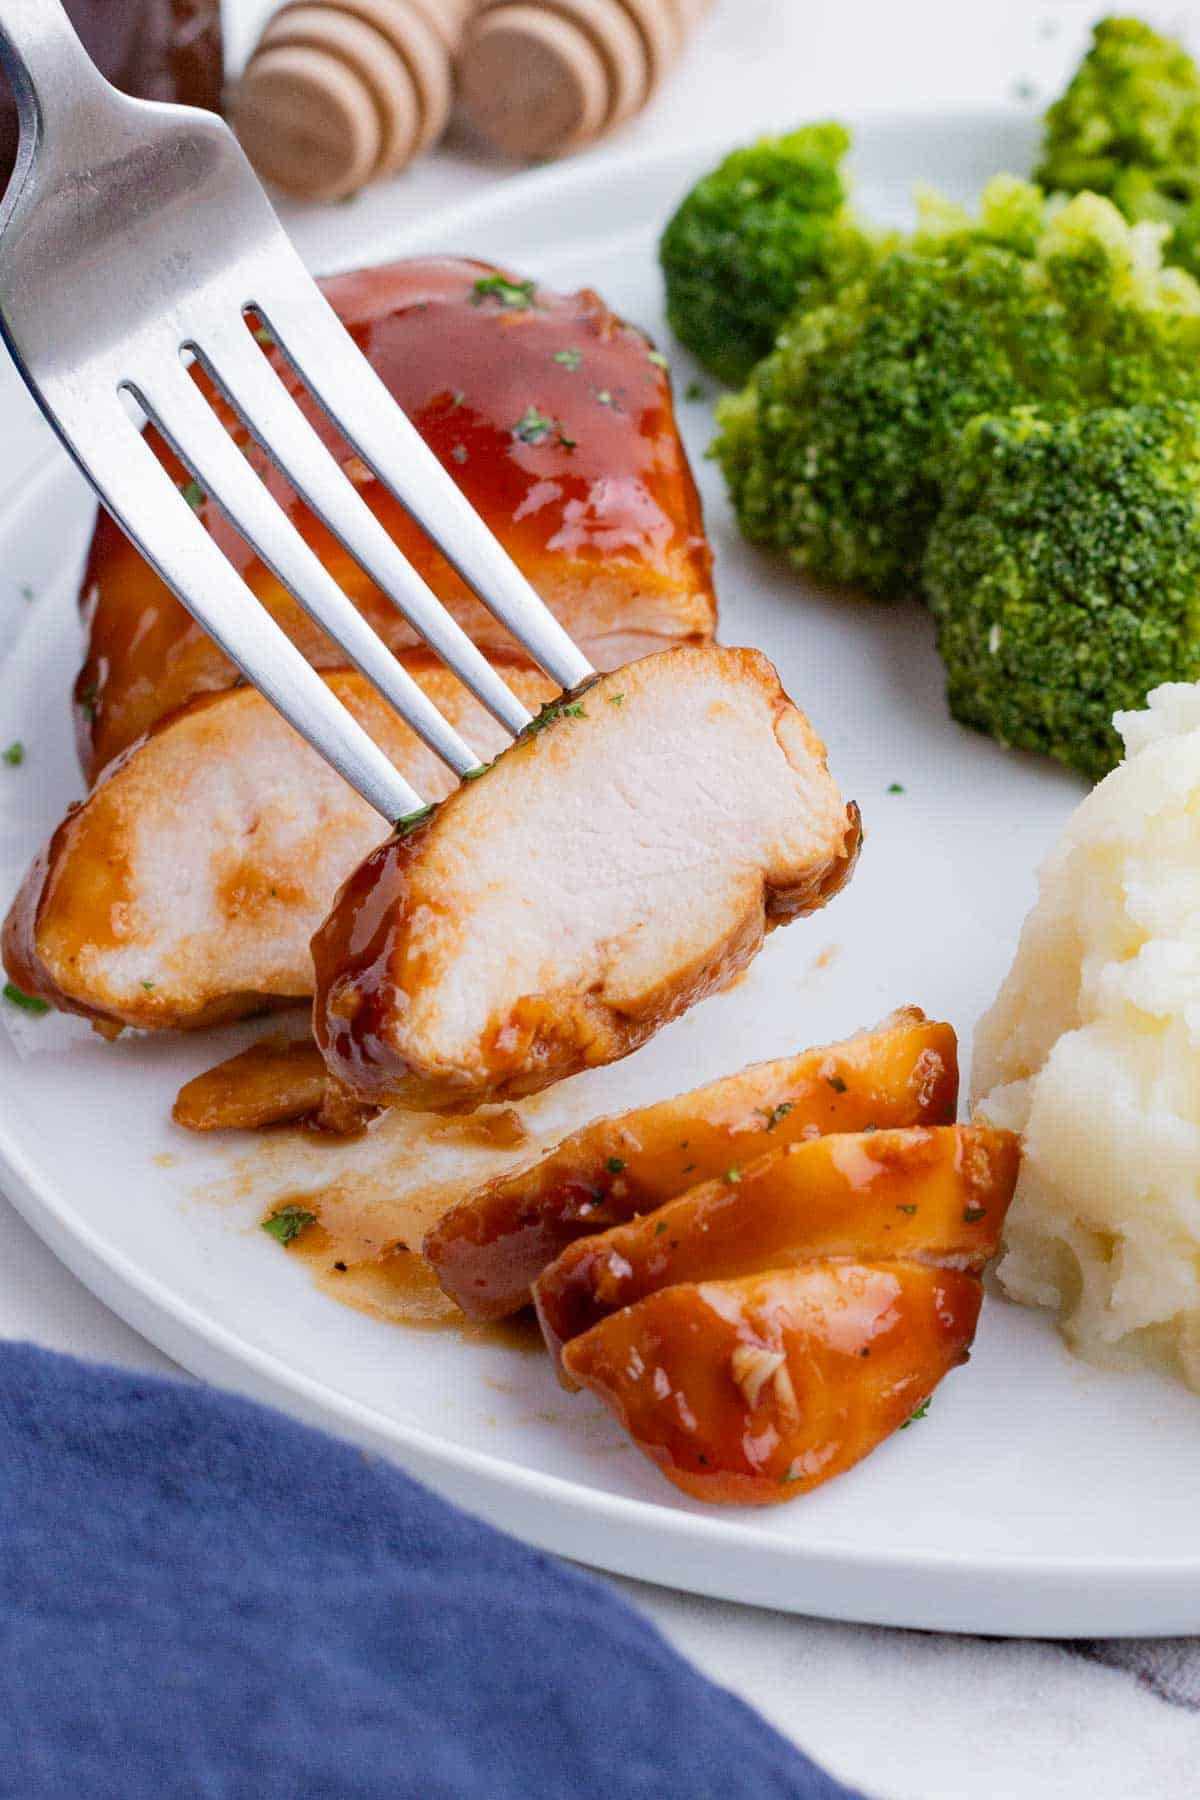 Oven baked bbq chicken is served alongside potatoes and broccoli.